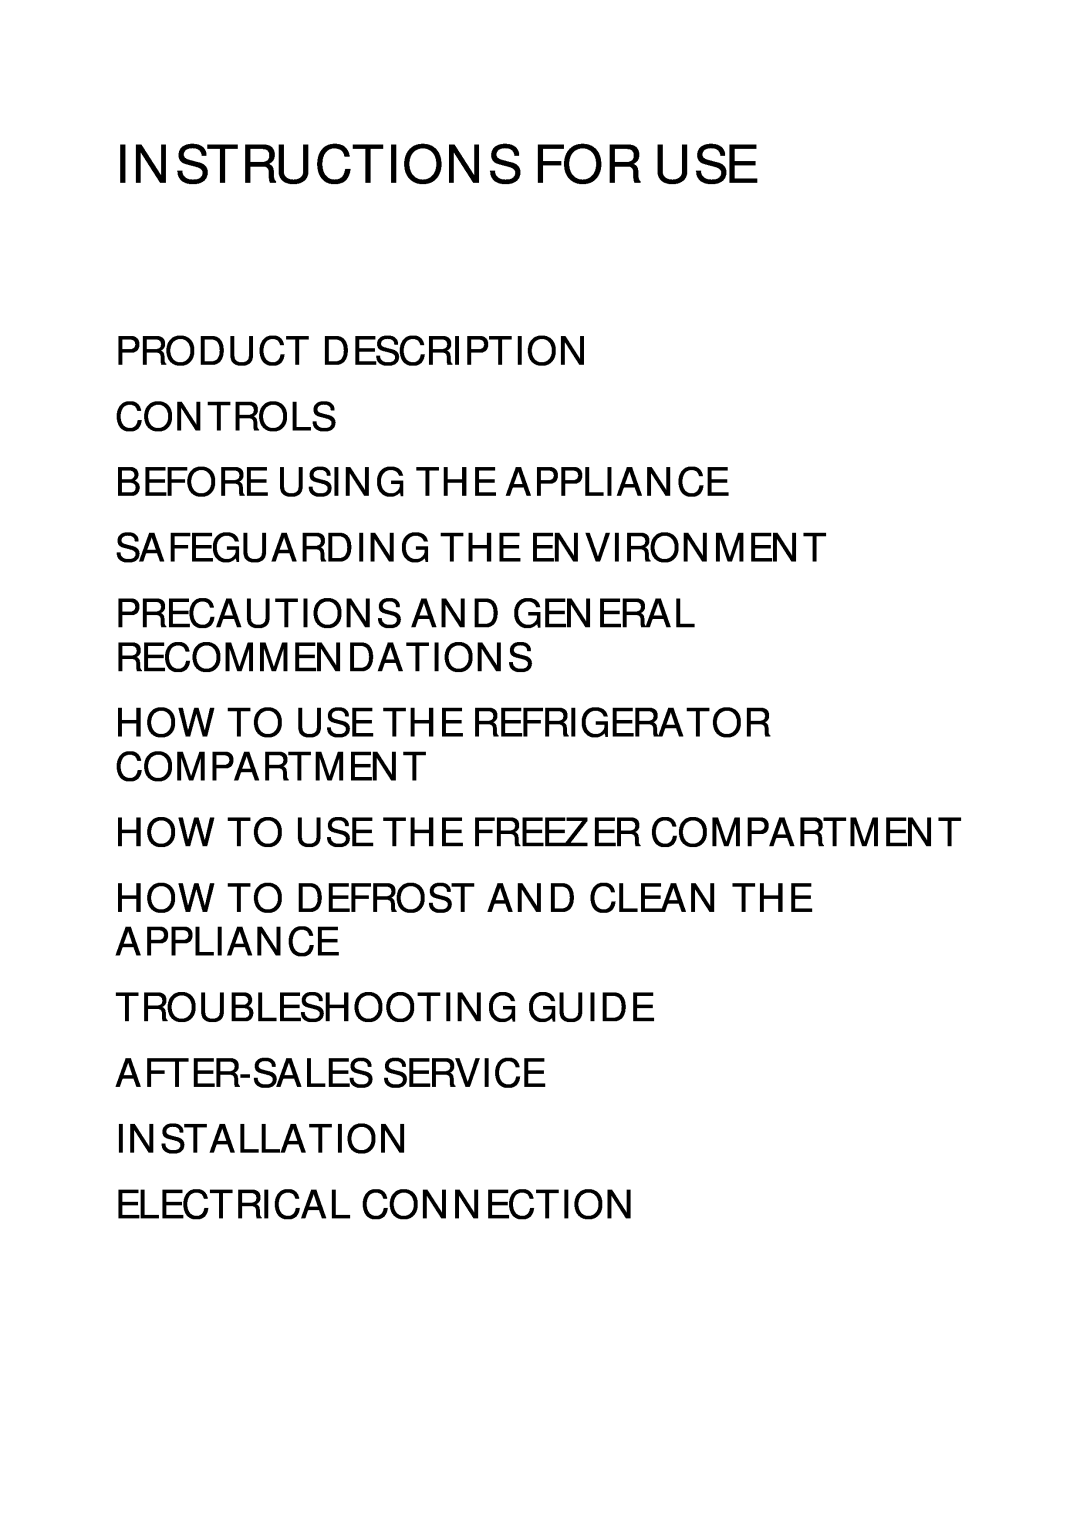 CDA FW420 Product Description Controls, Before Using The Appliance Safeguarding The Environment, Instructions For Use 